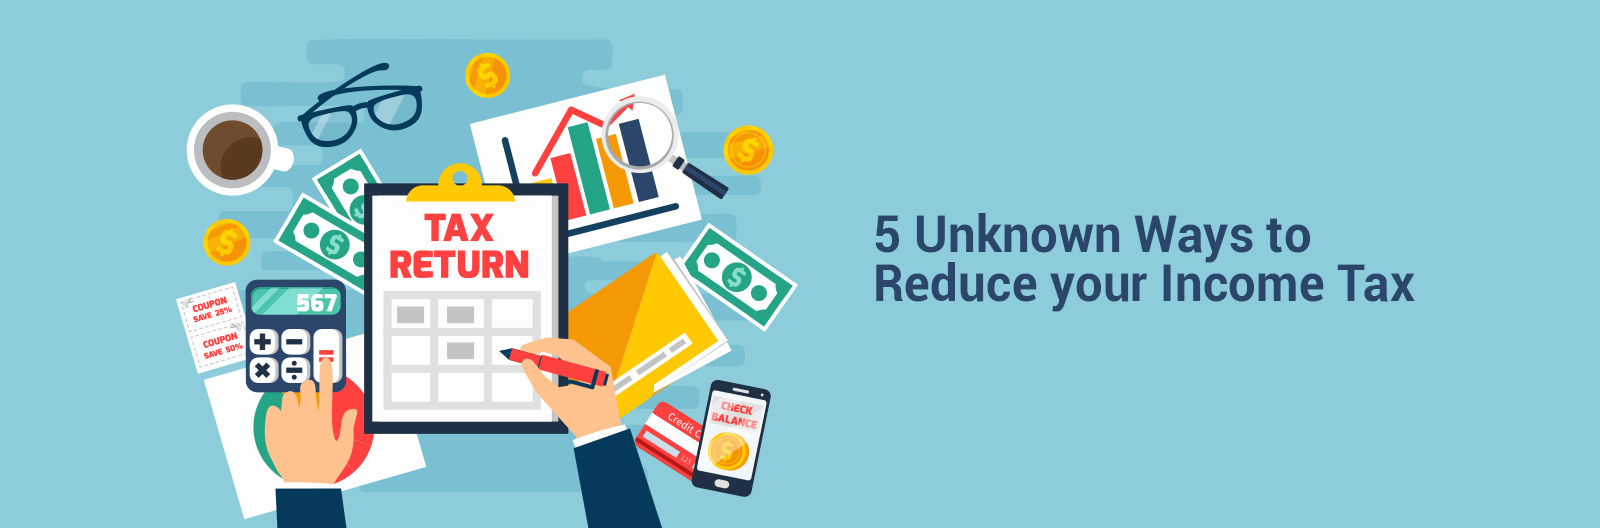 5 unknown ways to reduce your income tax